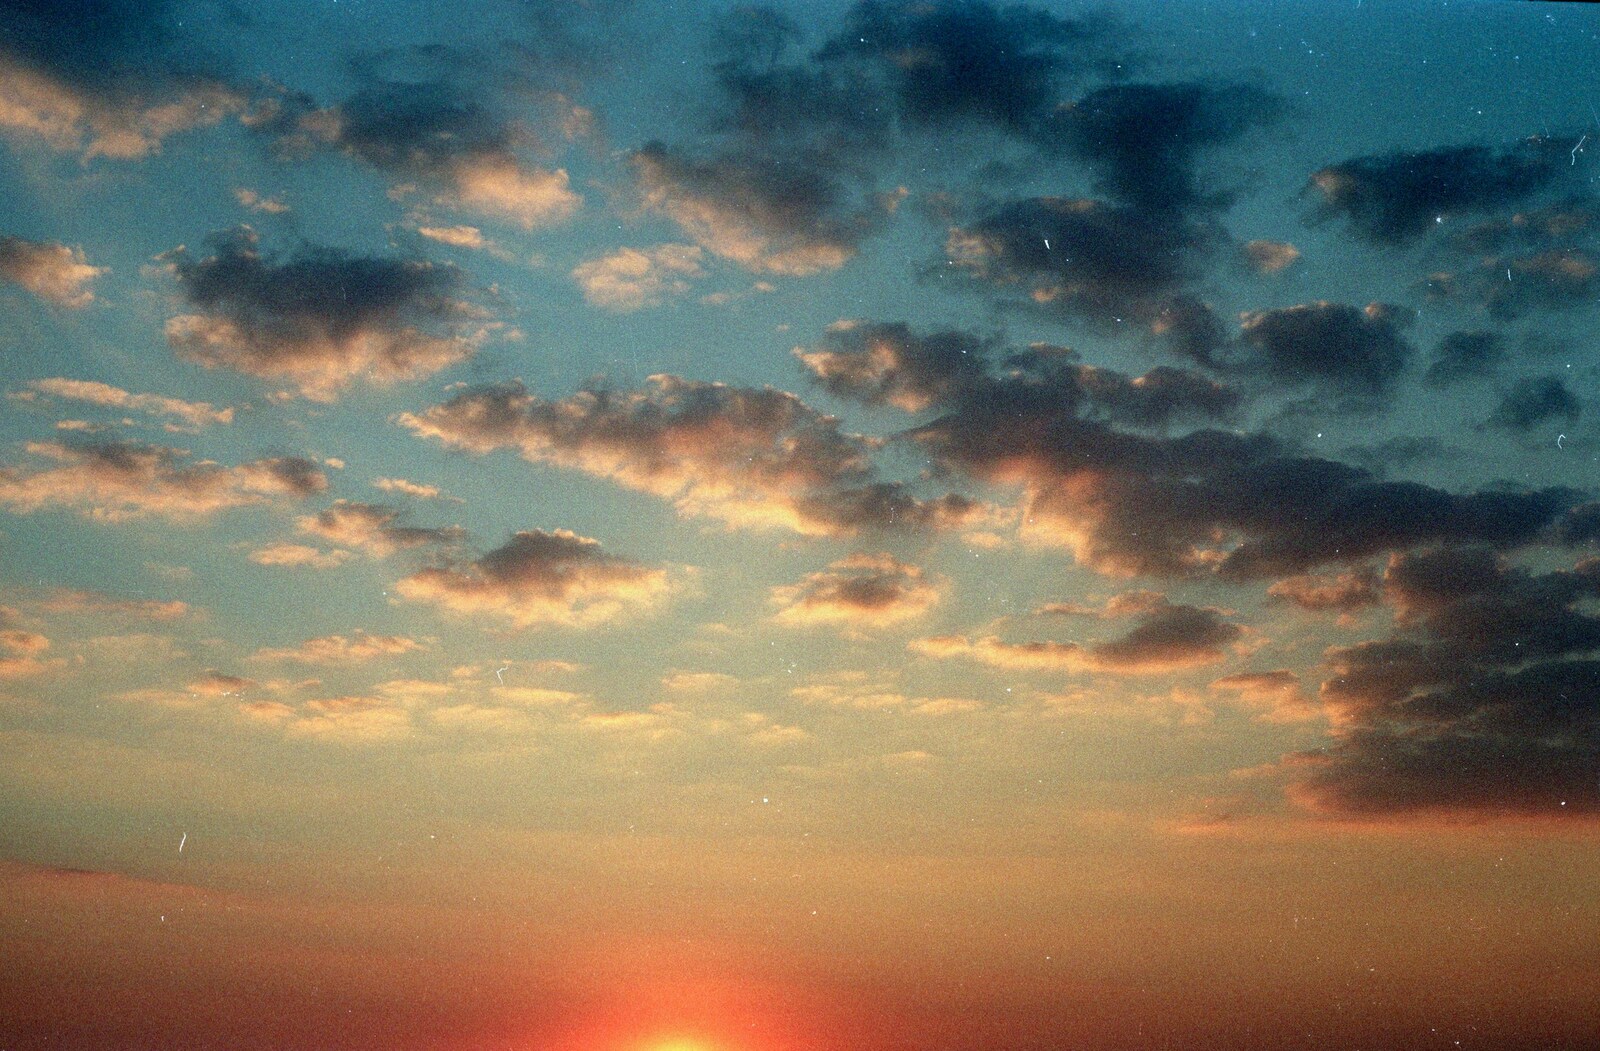 Another dramatic sunset from Uni: A Trip to the Riviera and Oberon Gets New Shoes, Torquay and Harbertonford, Devon - 3rd July 1989